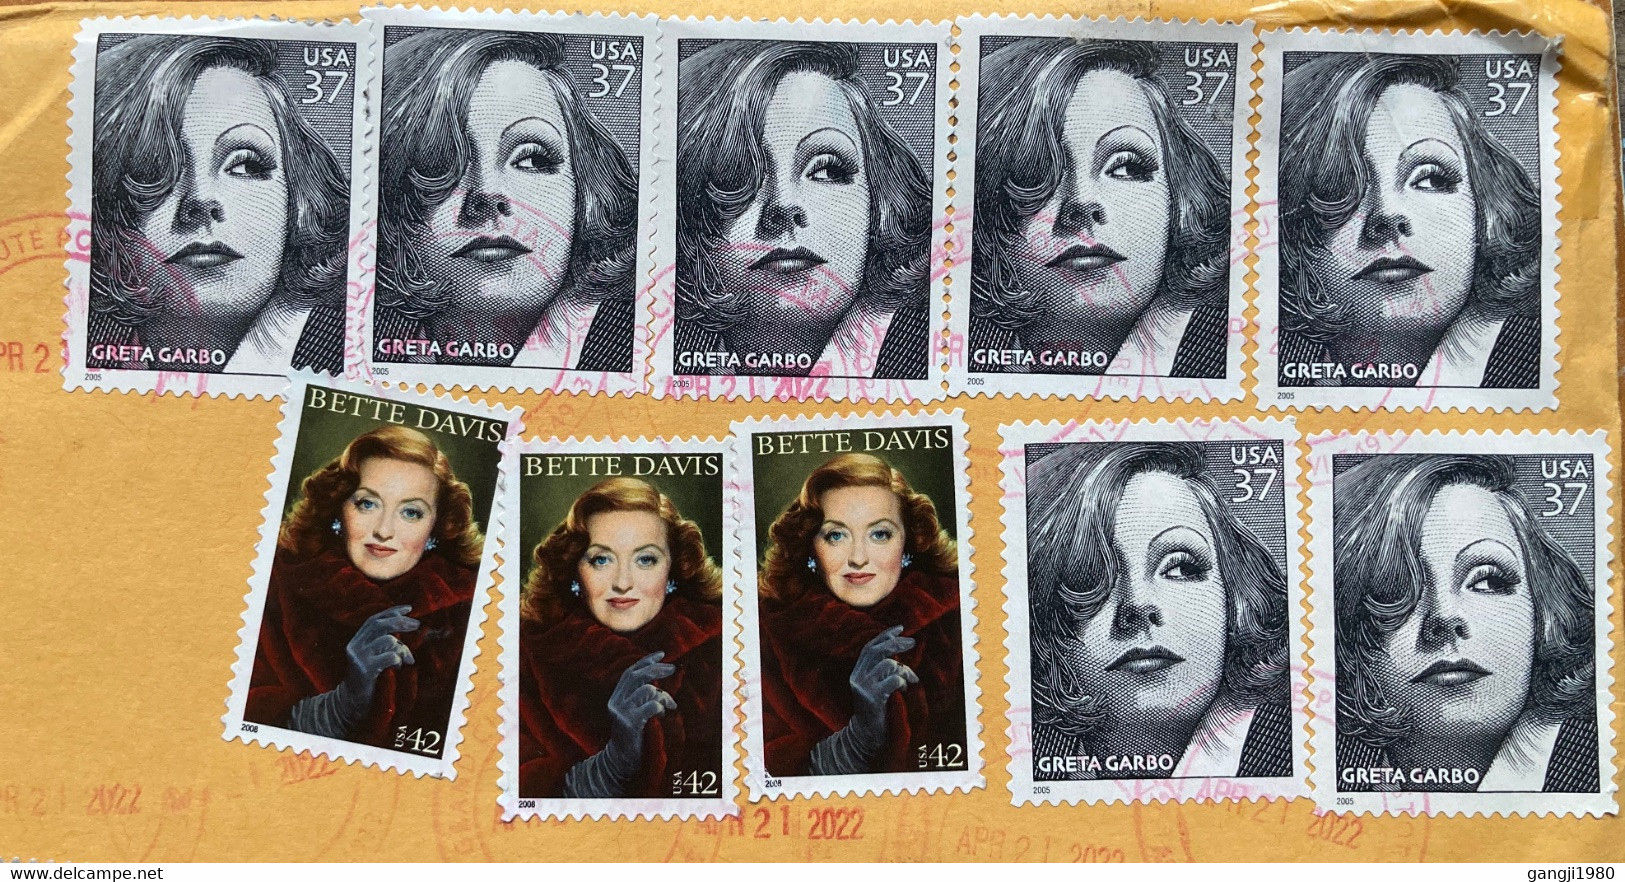 USA 2022, GRETA GARBO ,BETTE DEVIS, BULLRUN, FORT SUMTER 12 STAMPS USED COVER TO INDIA, GRAND CHUTE P.O .CANCELLATION - Covers & Documents